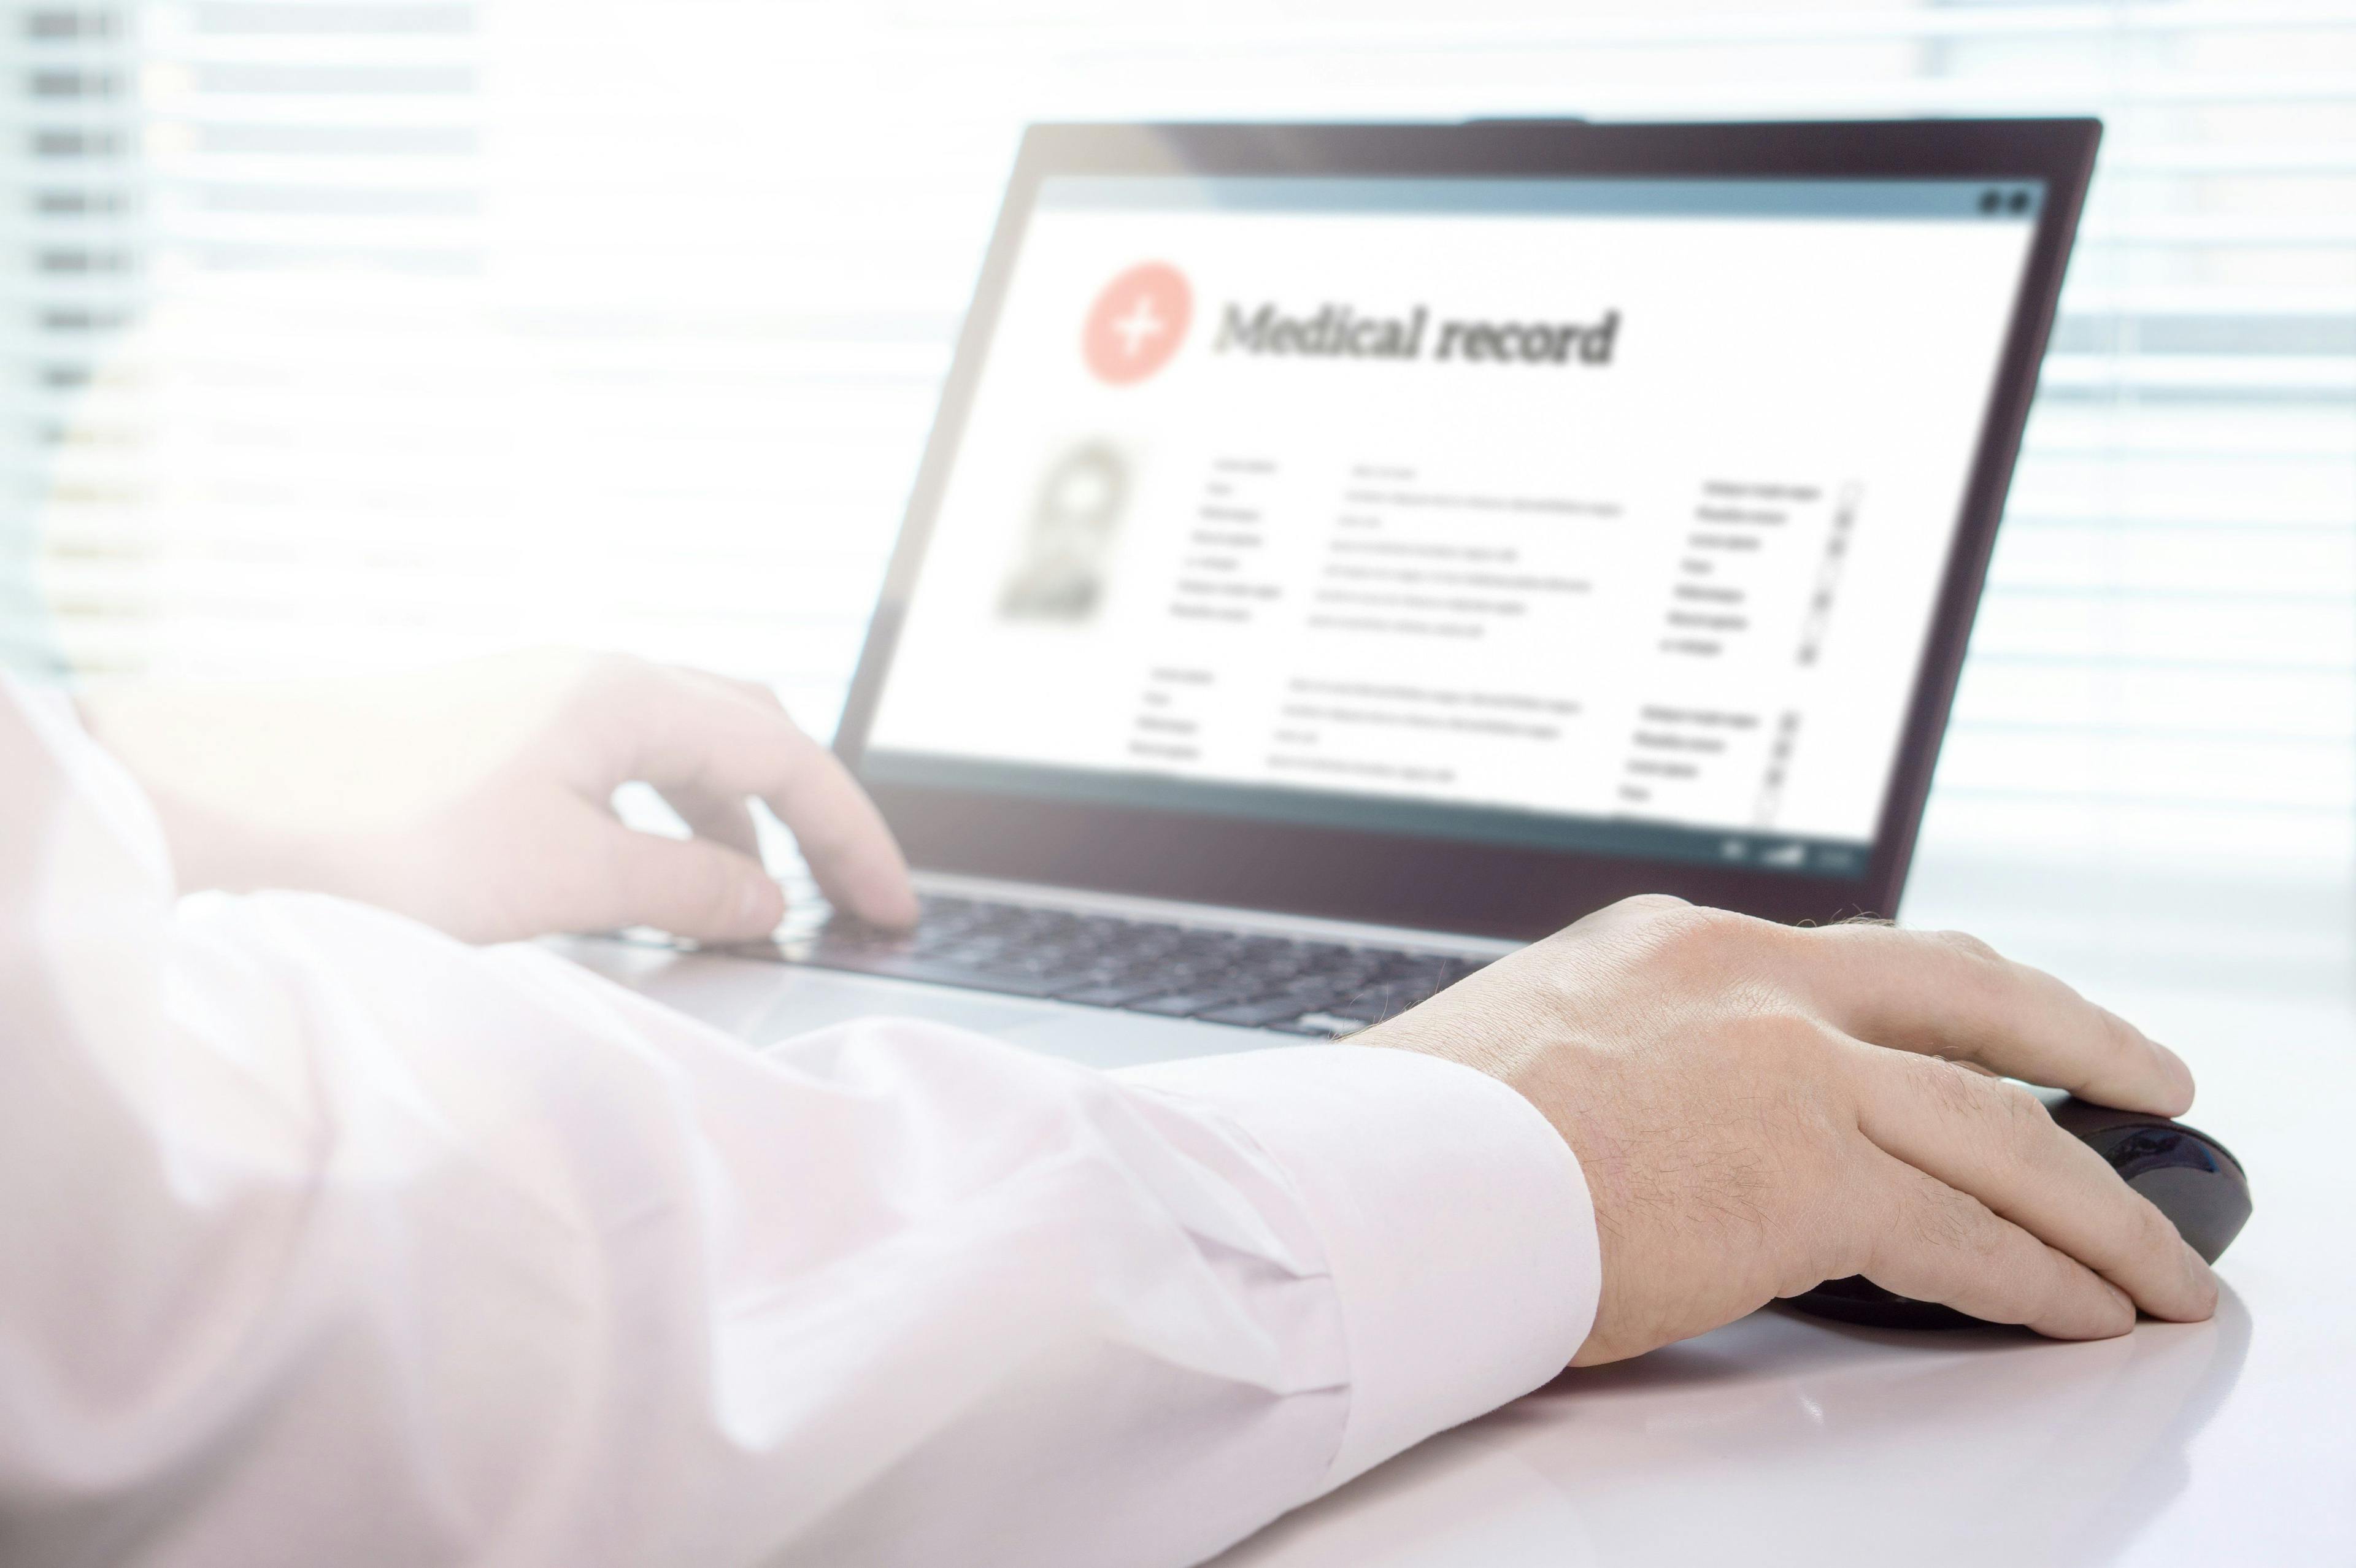 Physicians need better EHR training, study finds